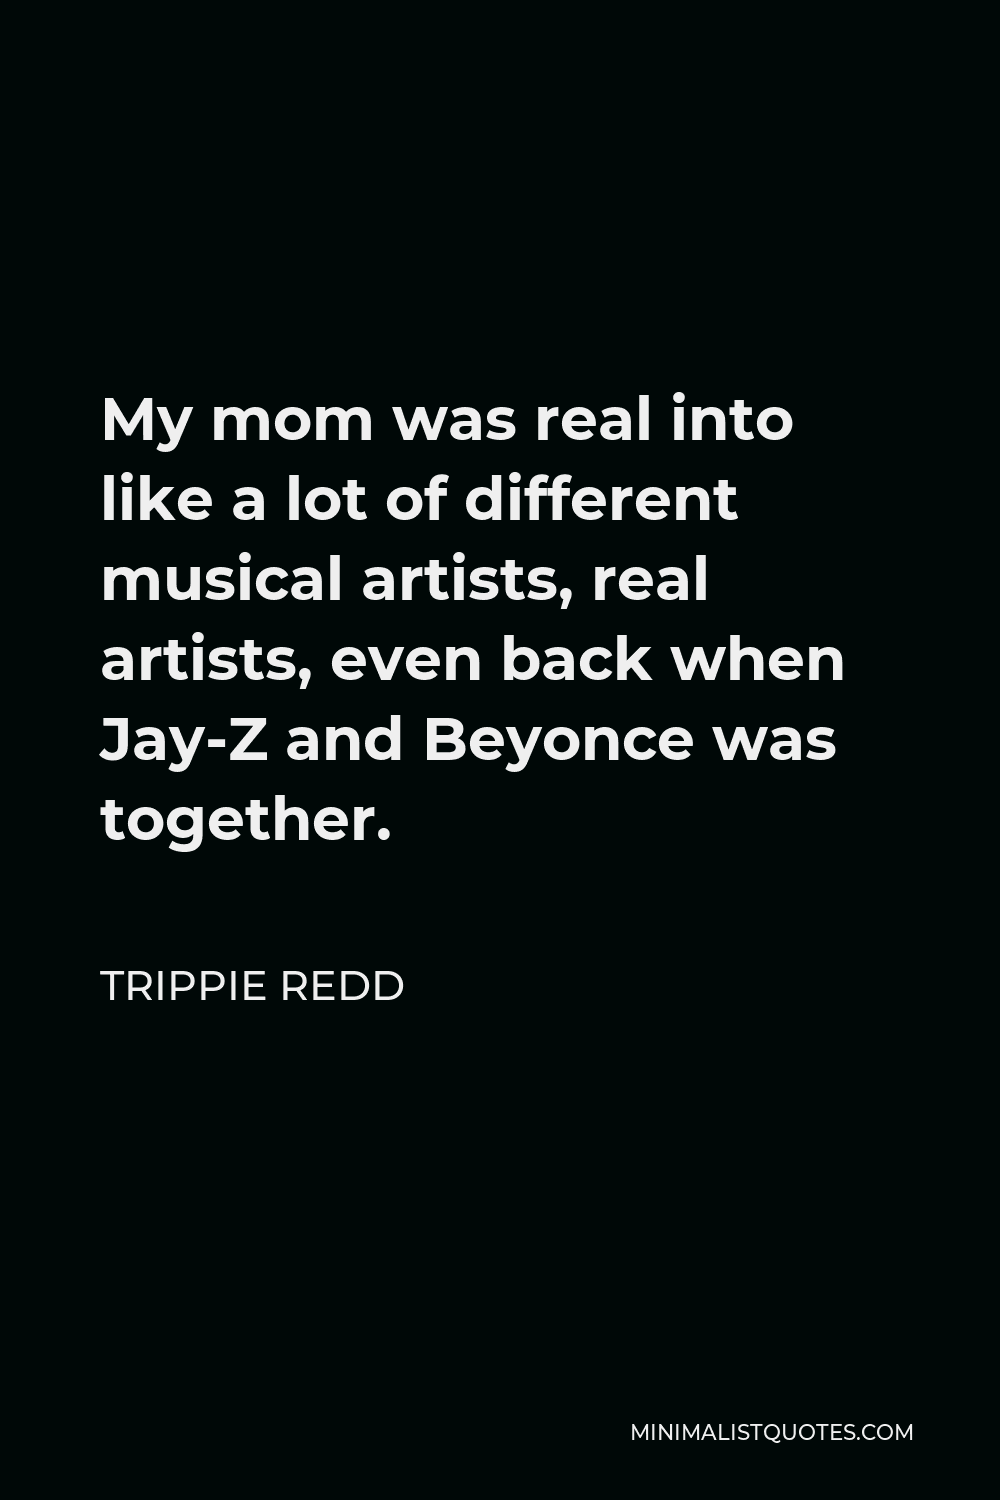 Trippie Redd Quote - My mom was real into like a lot of different musical artists, real artists, even back when Jay-Z and Beyonce was together.